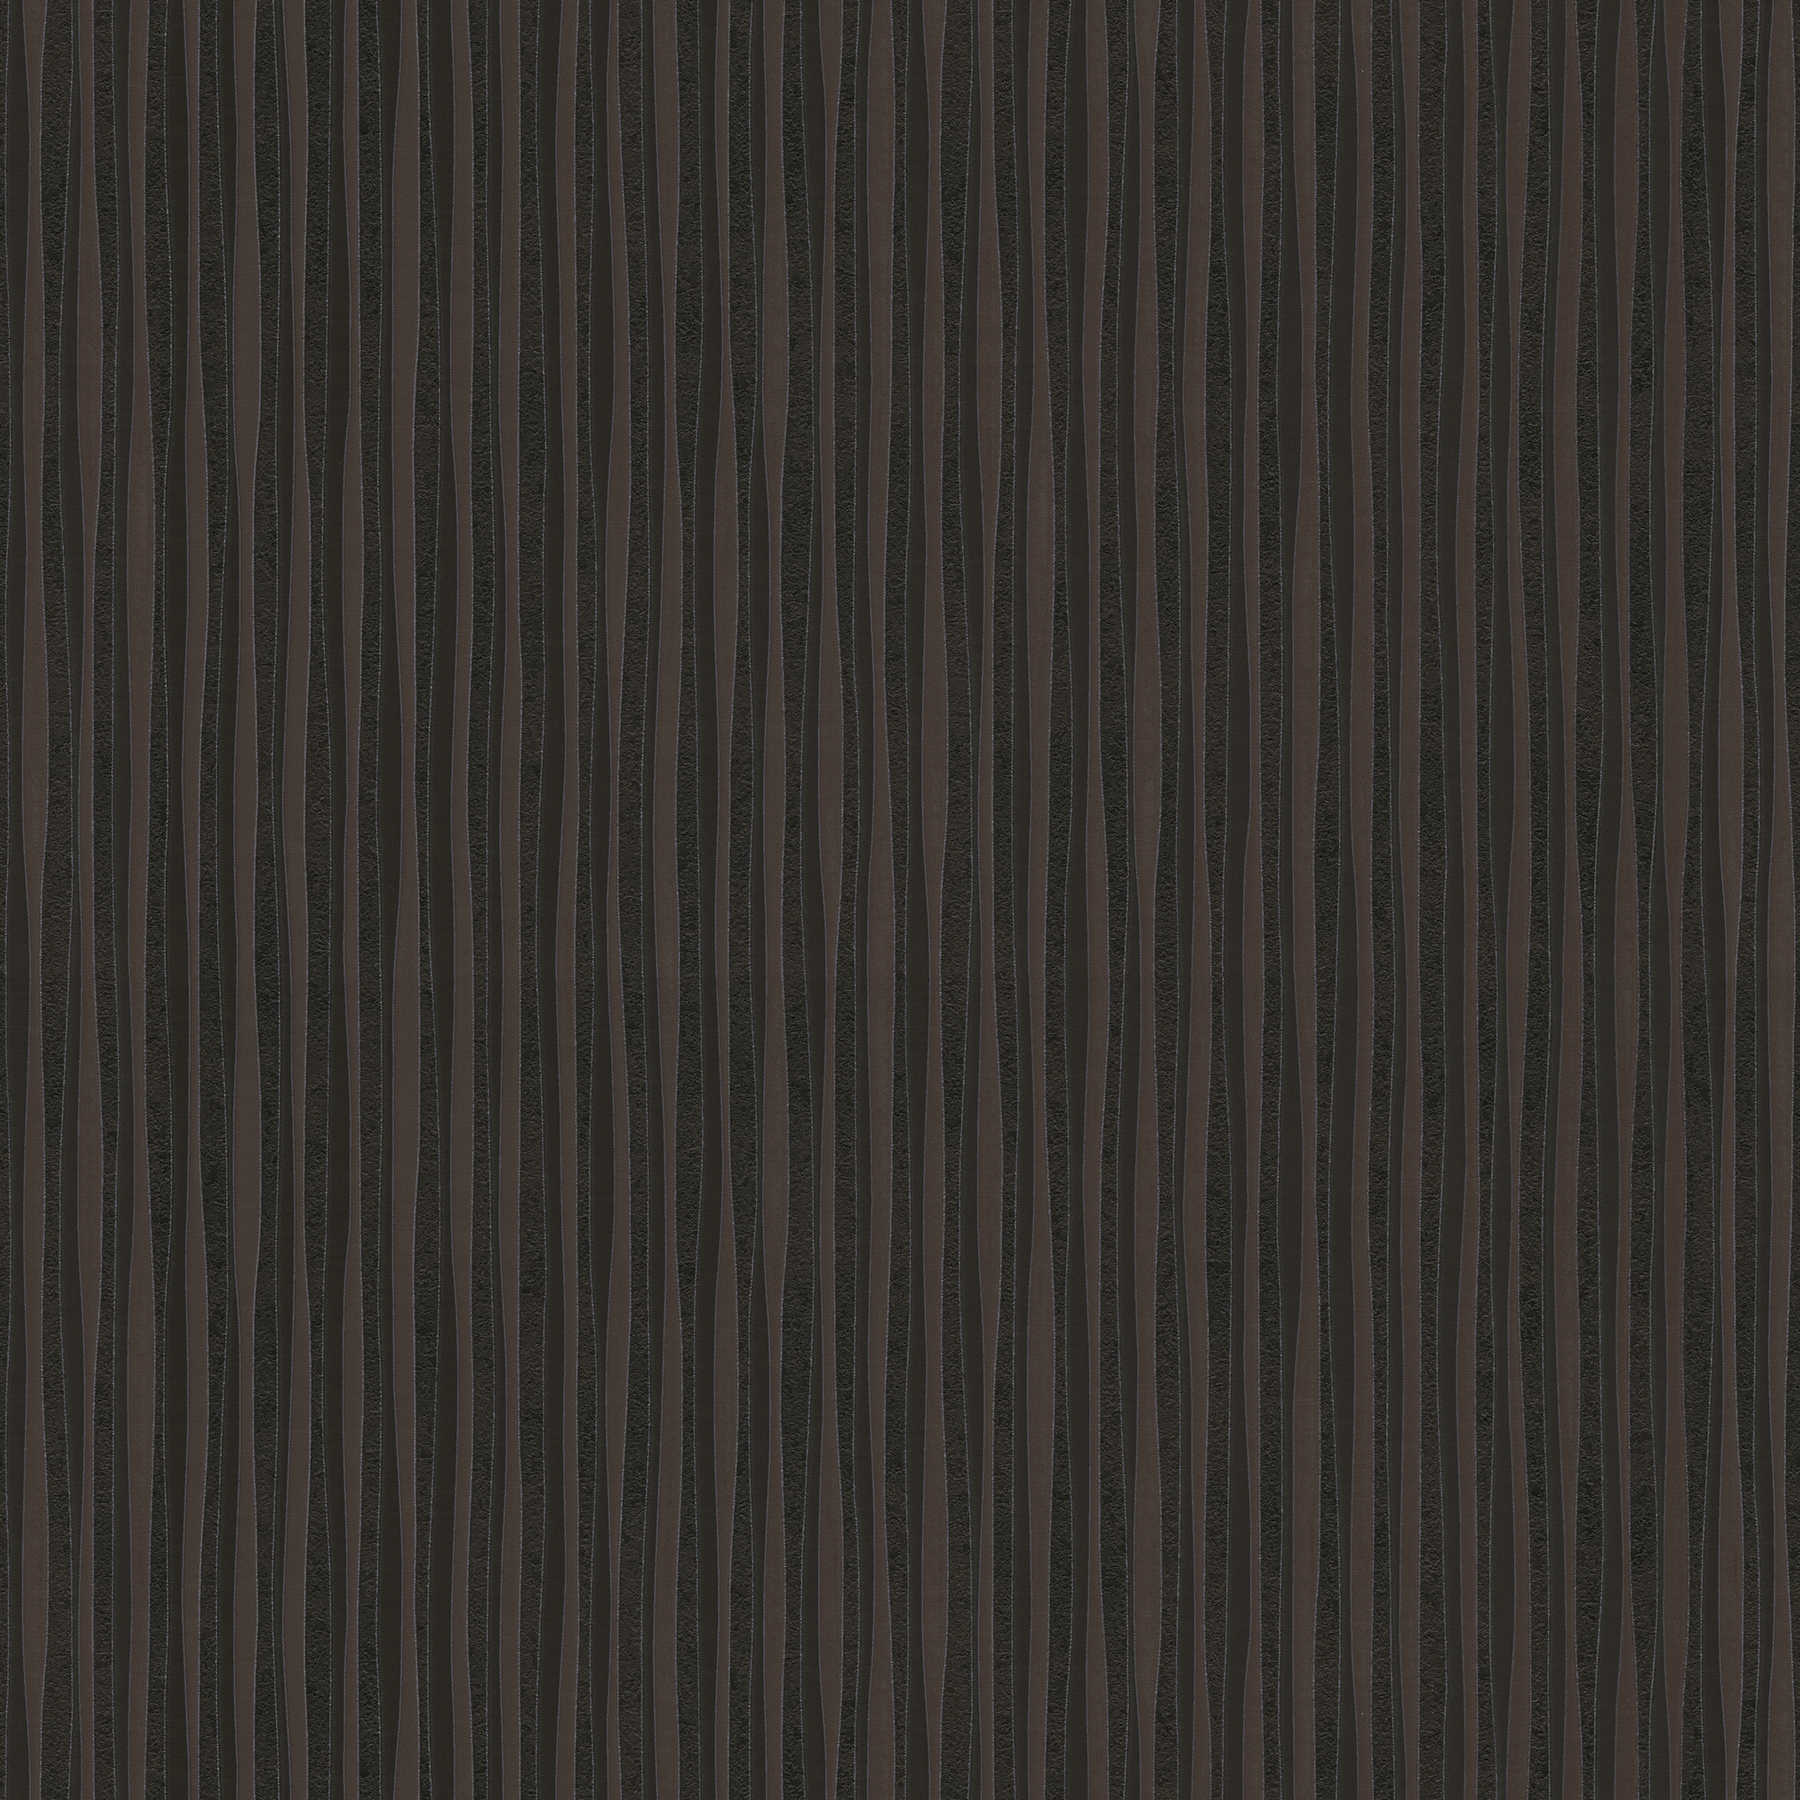         Wallpaper with narrow & moving stripes - brown
    